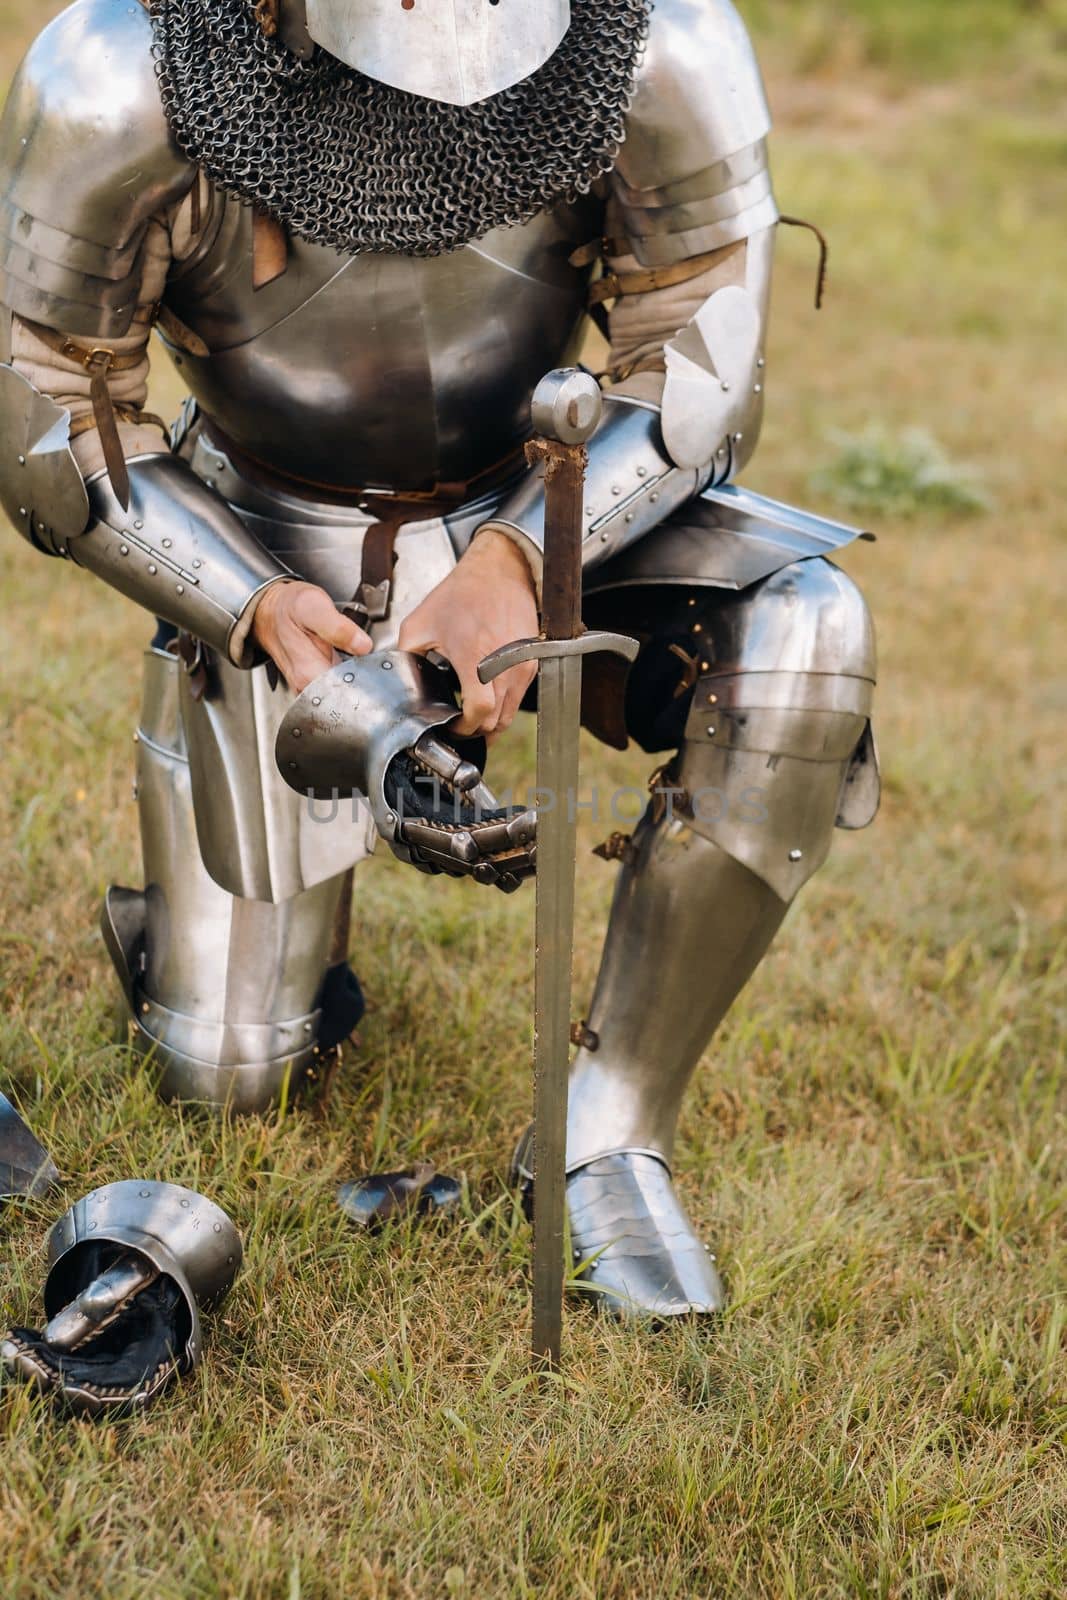 Close-up of a medieval knight in armor preparing for battle.